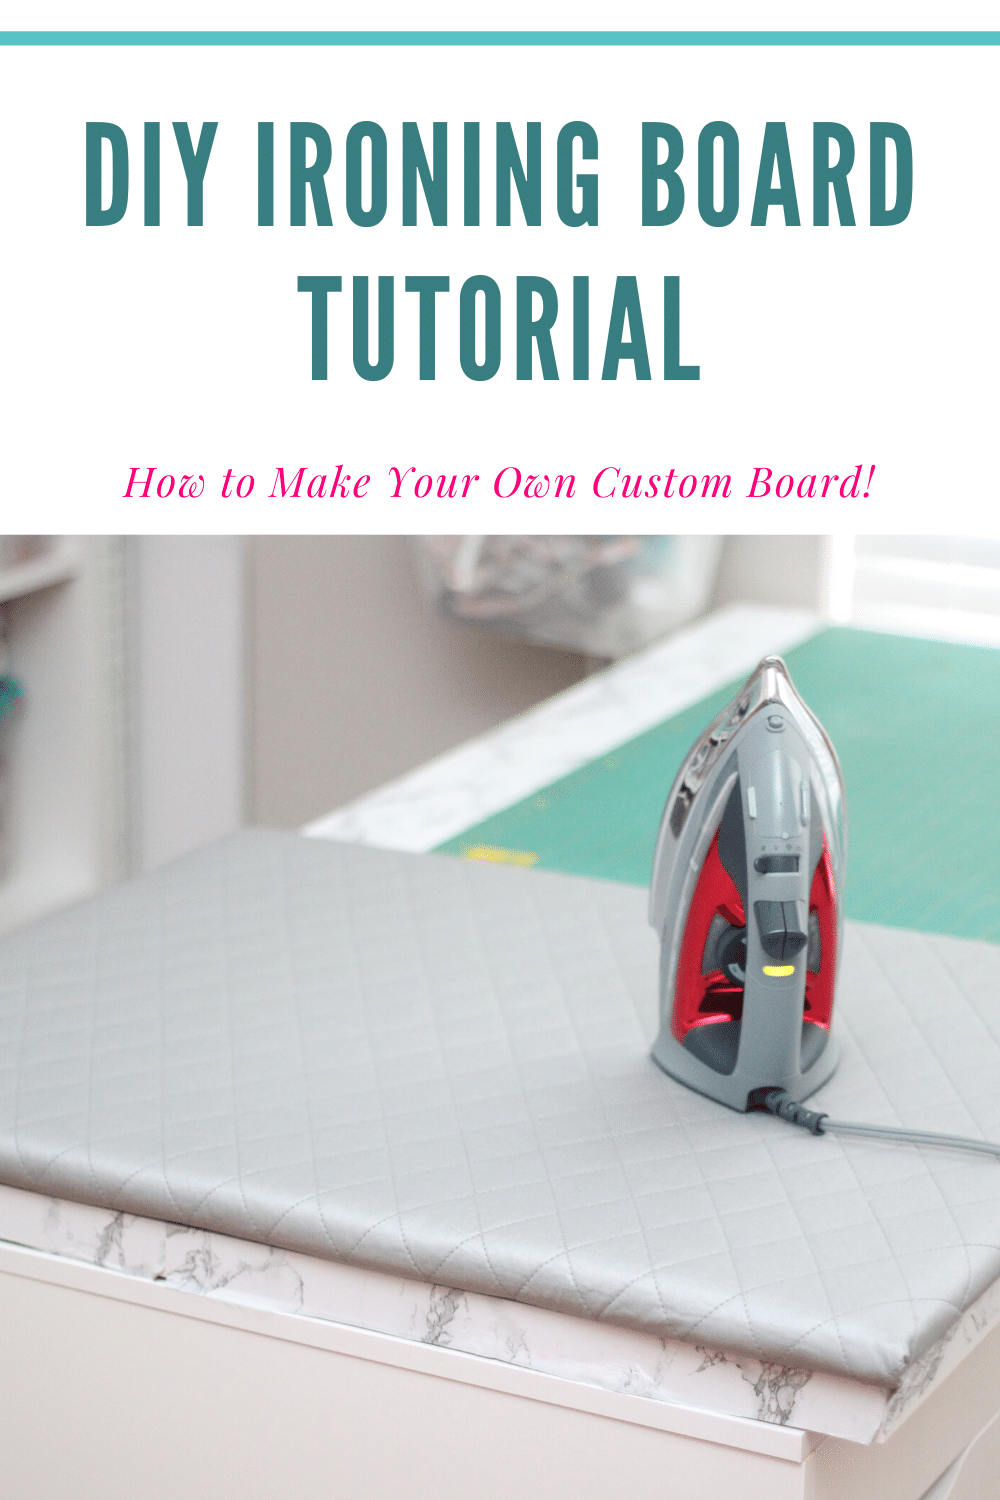 diy ironing board tutorial and instructions